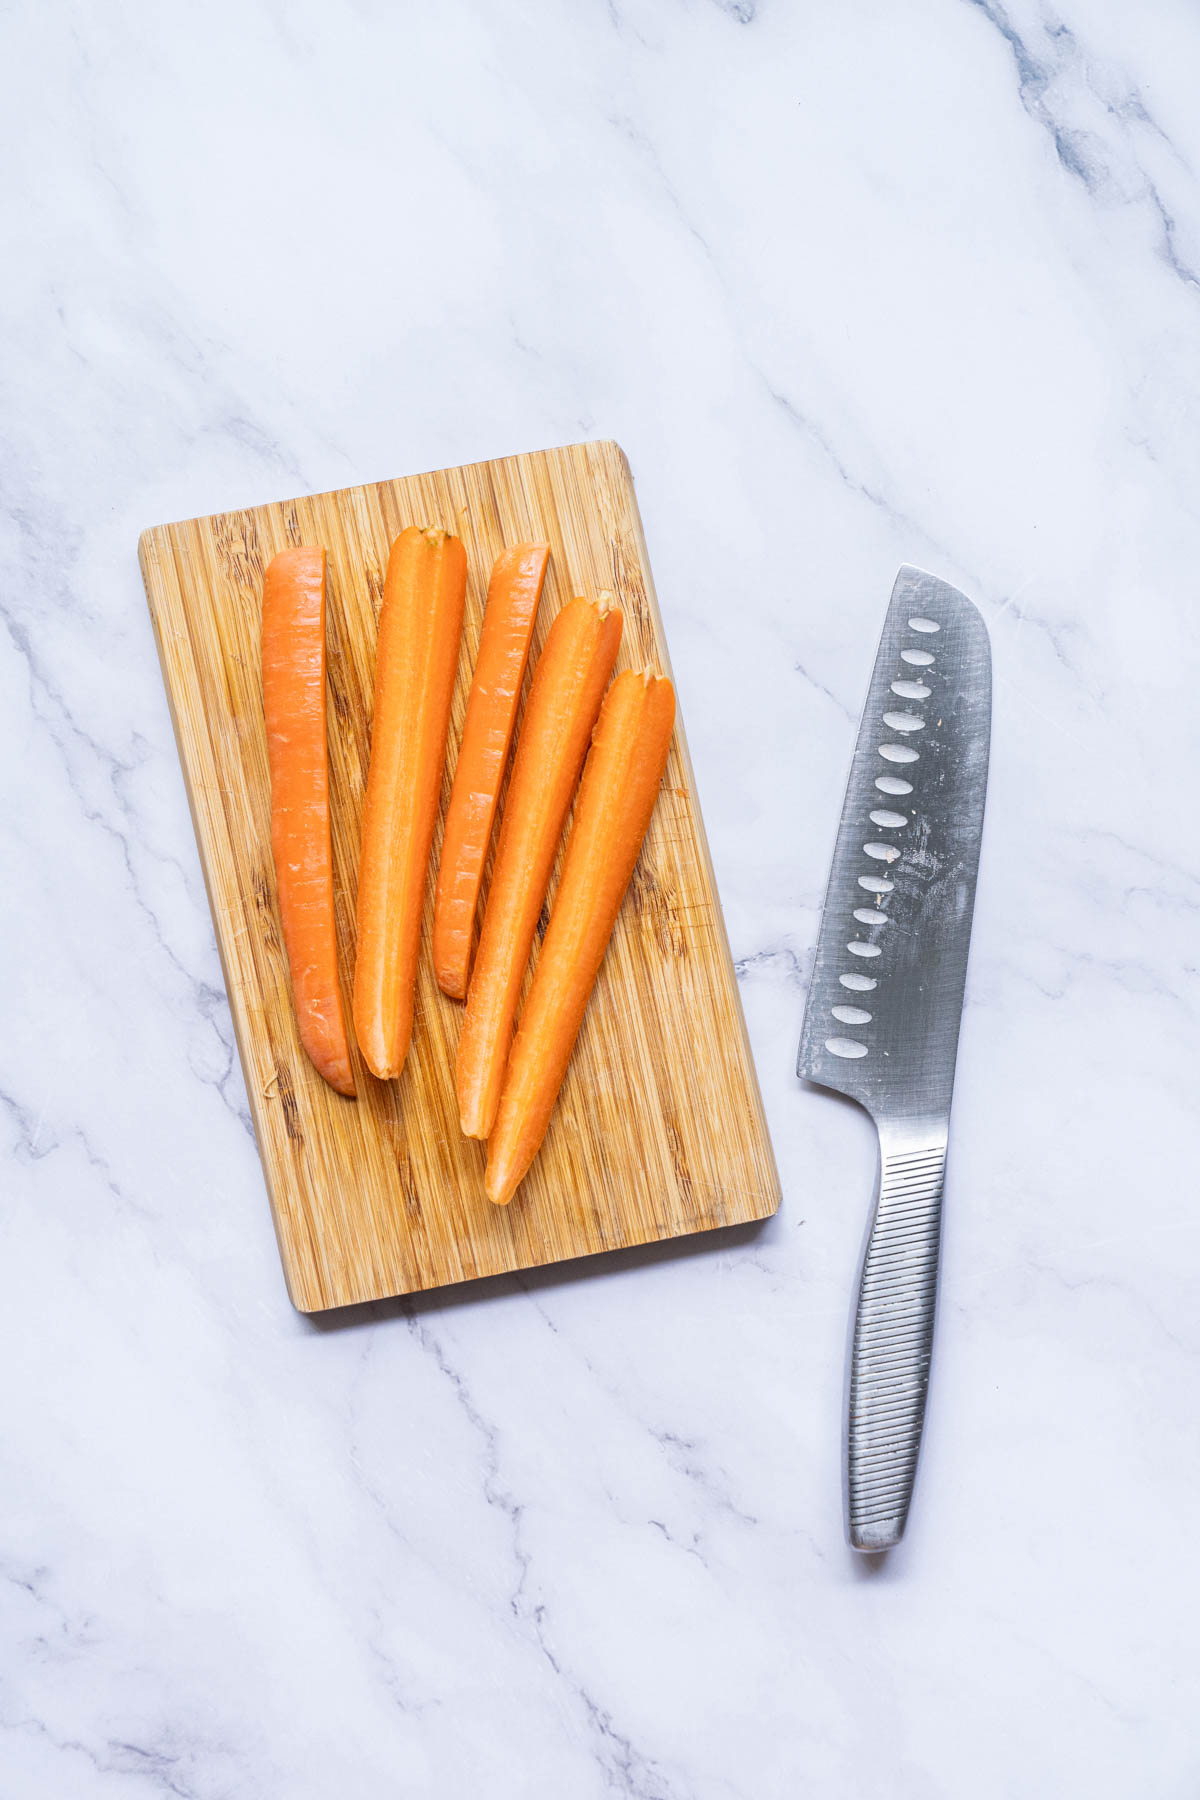 Carrots on a cutting board with a knife.